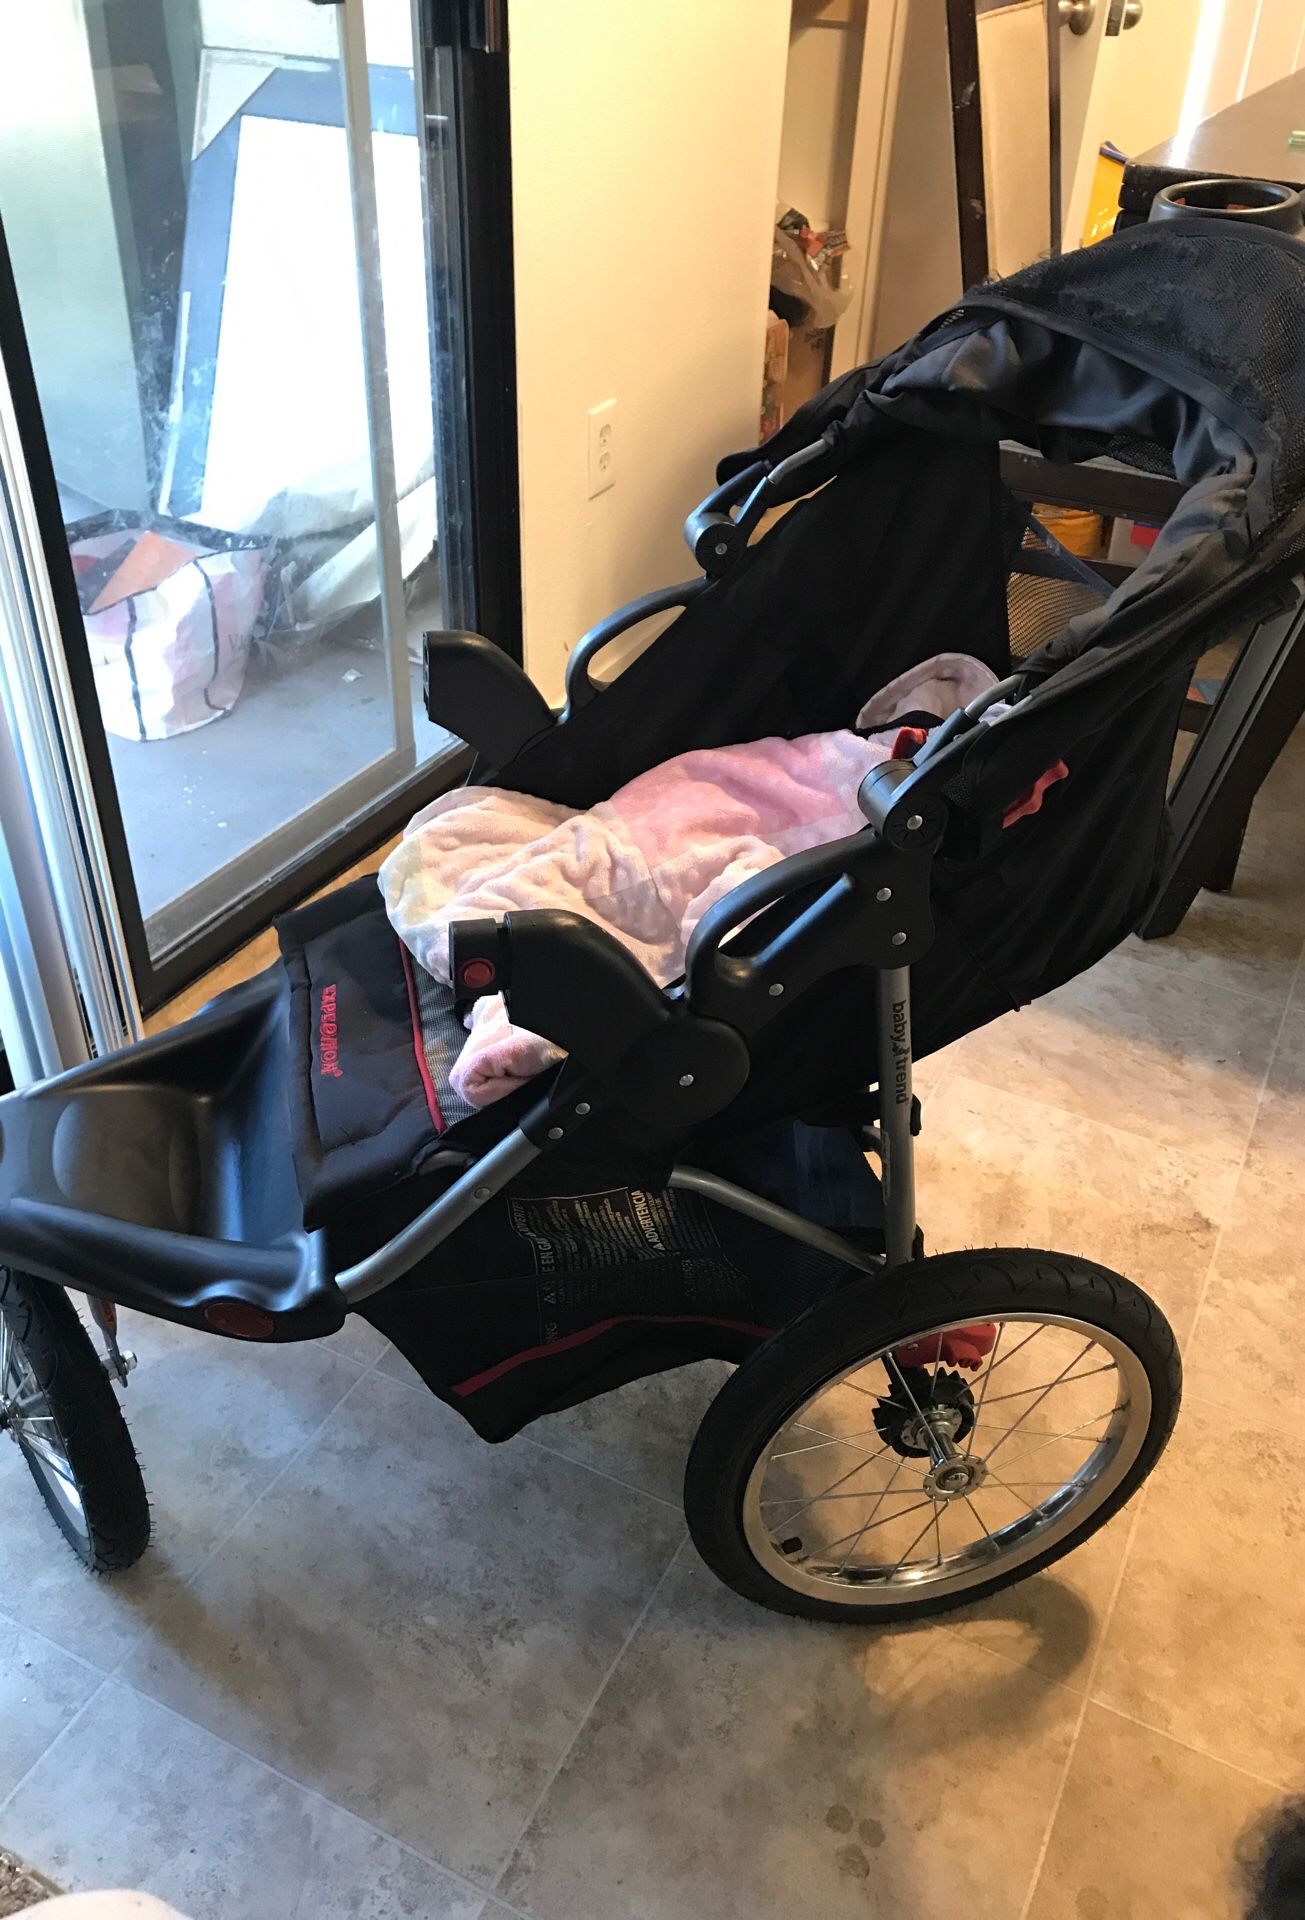 Expedition jogger stroller